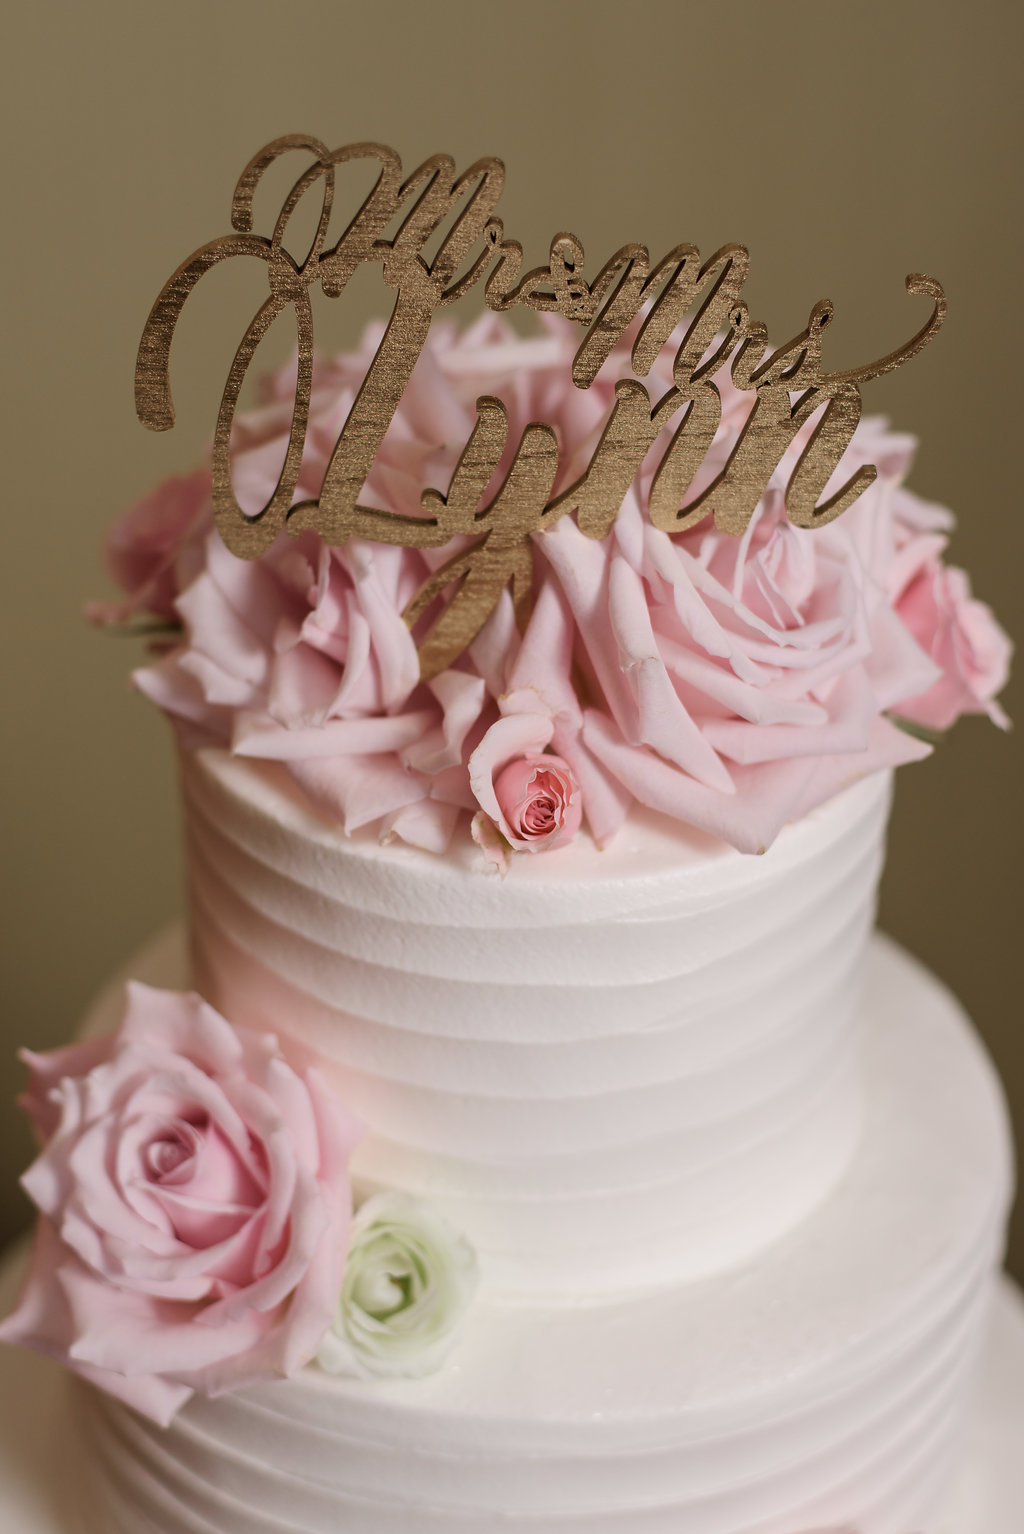 Stylish Mr and Mrs Gold Cake Topper with Blush Pink Roses on Round White Wedding Cake